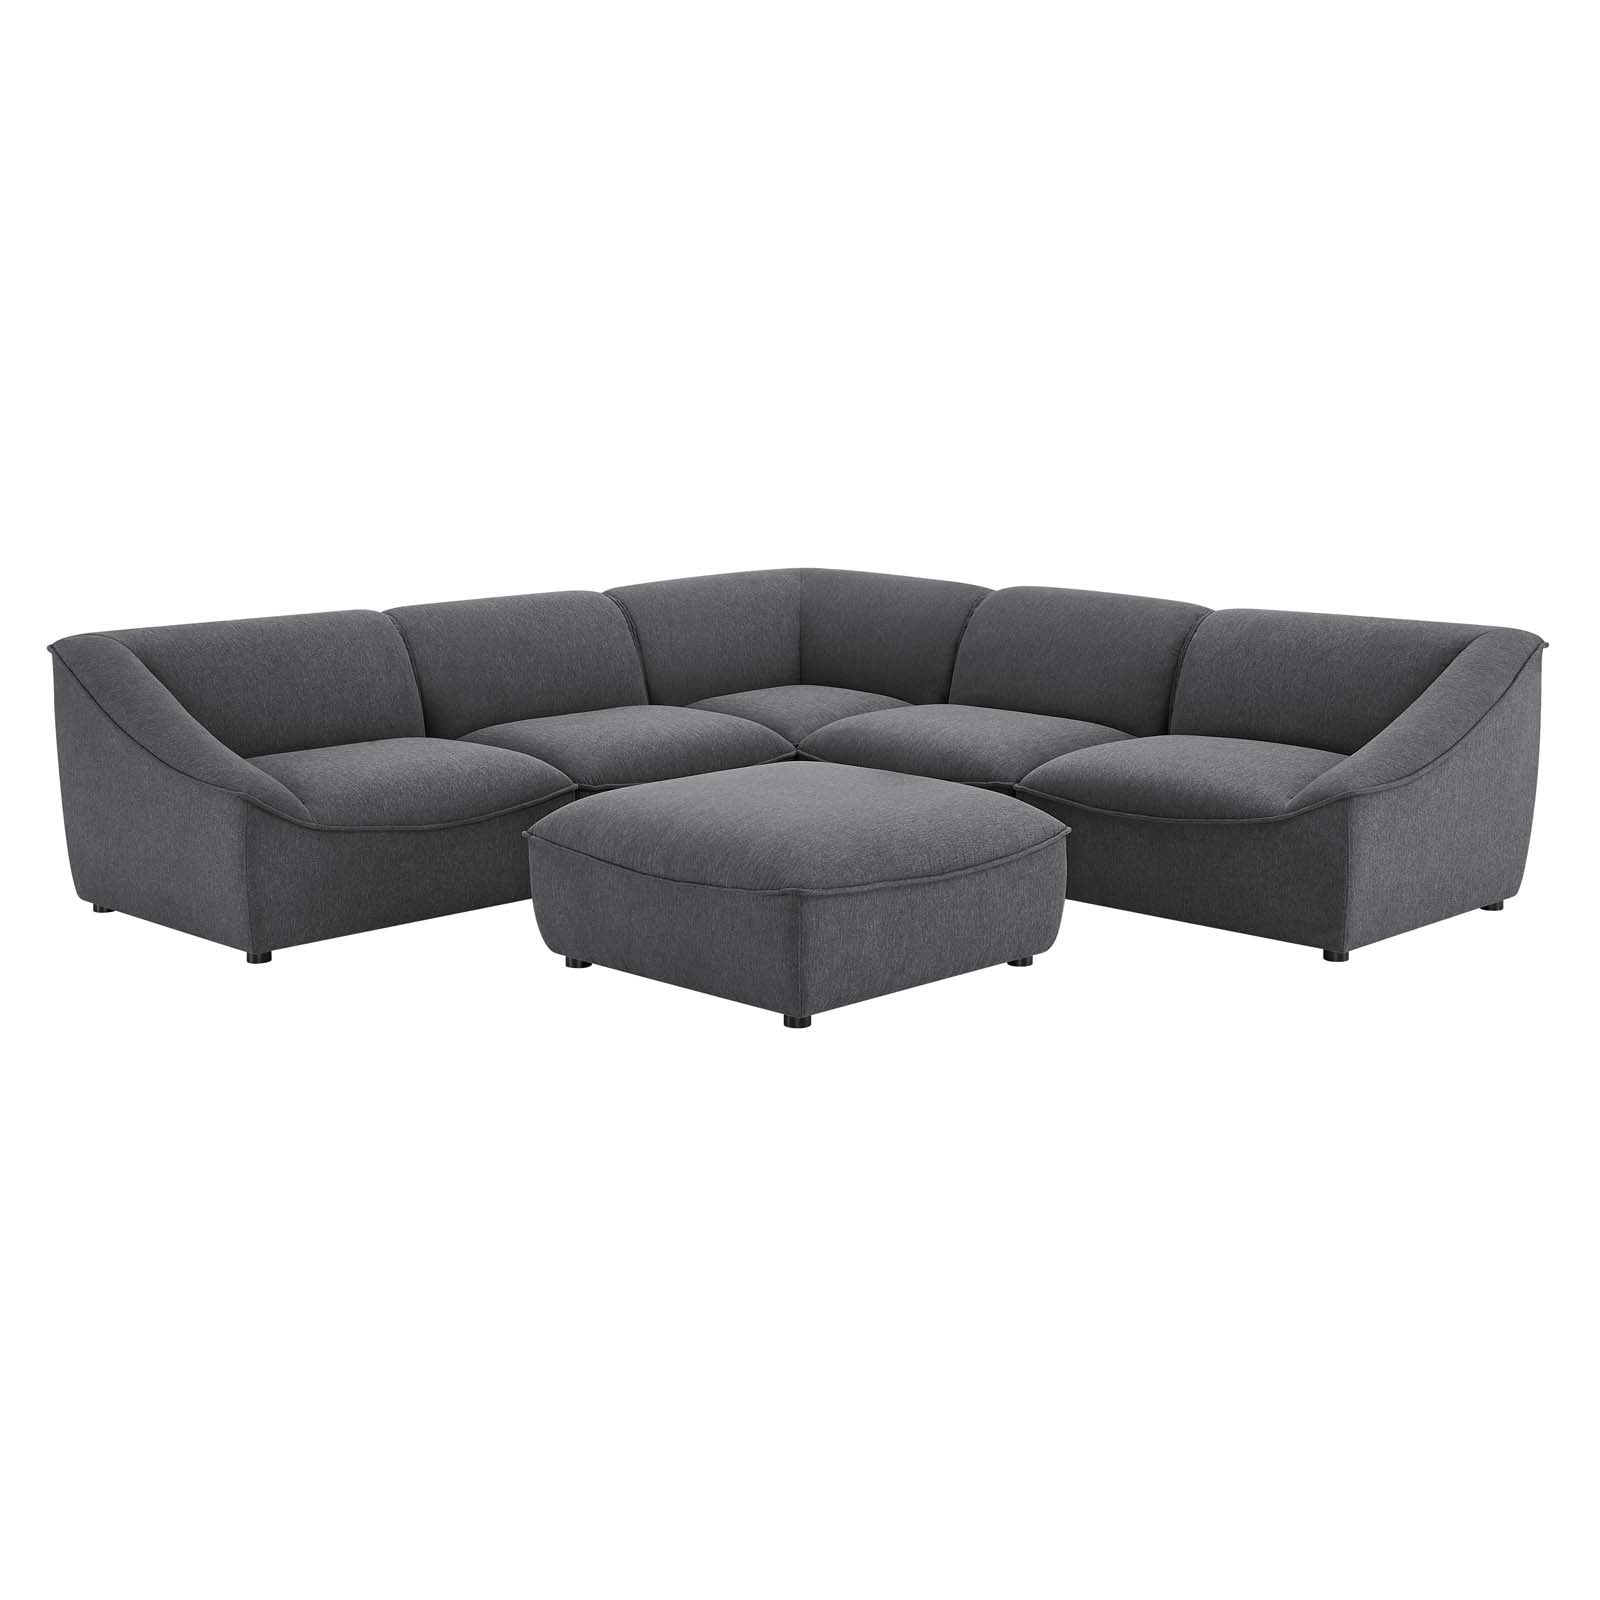 Modway Sectional Sofas - Comprise-6-Piece-Sectional-Sofa-Charcoal